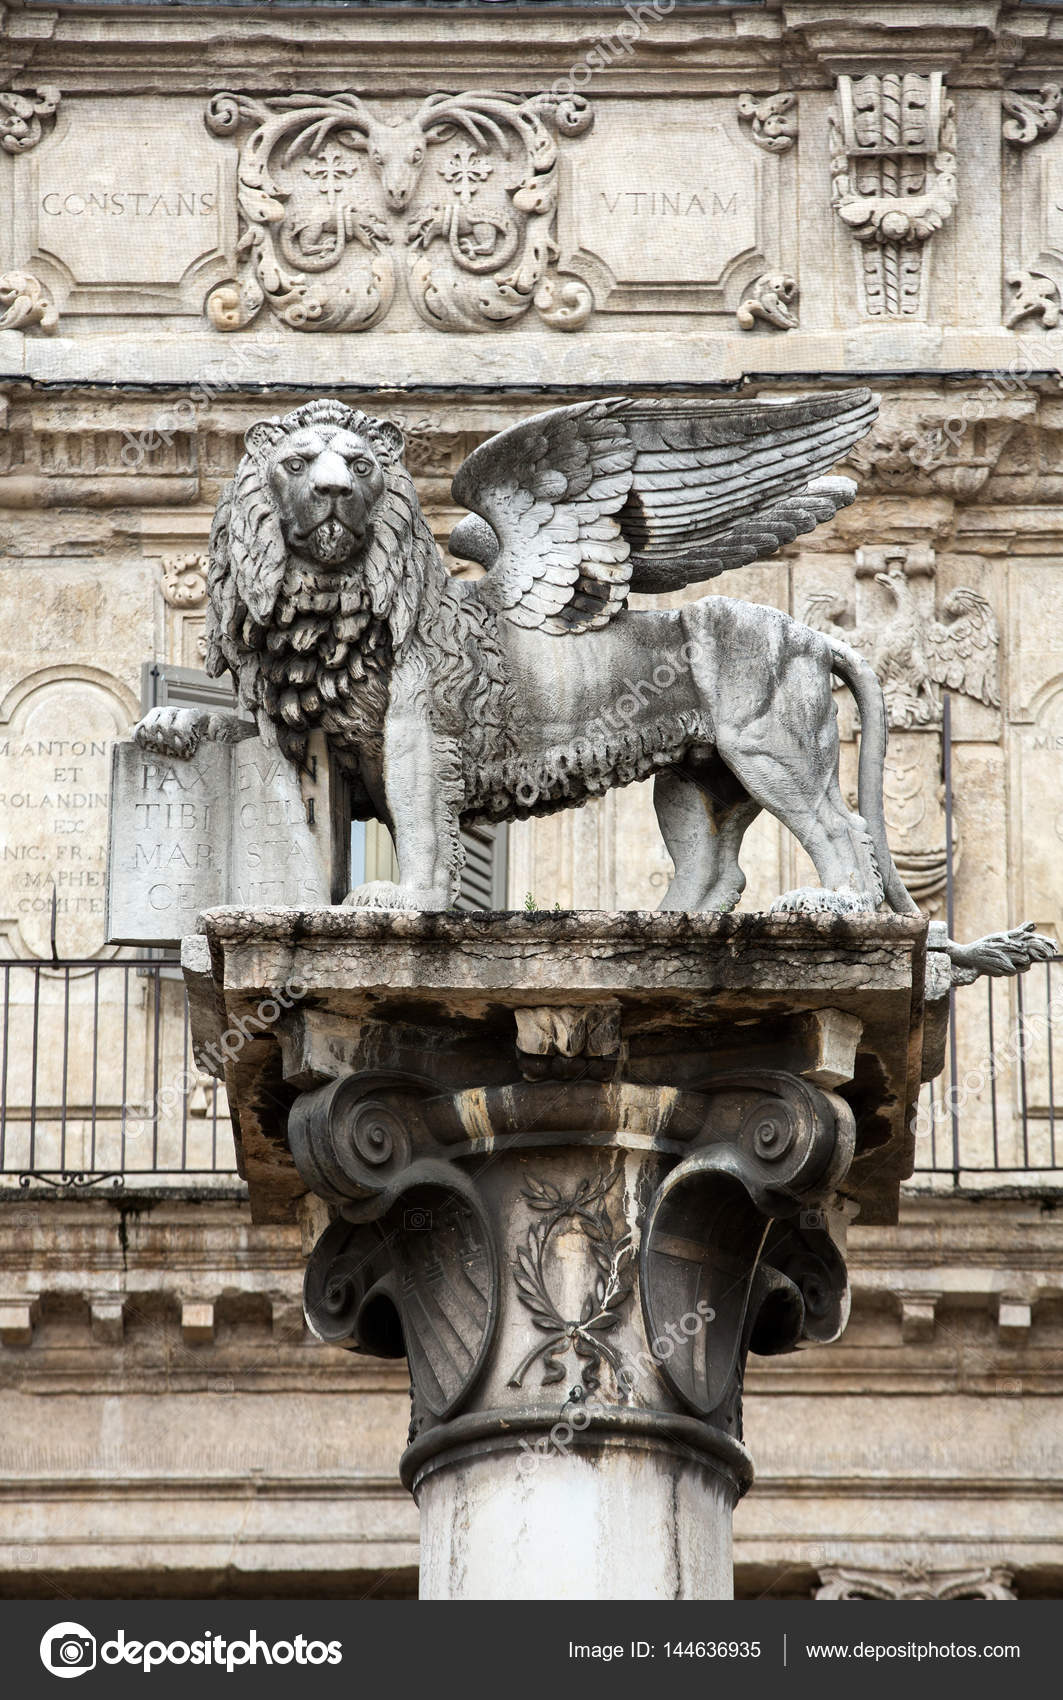 The Lion of Saint Mark's symbolizes the city's close ties with Venice ...